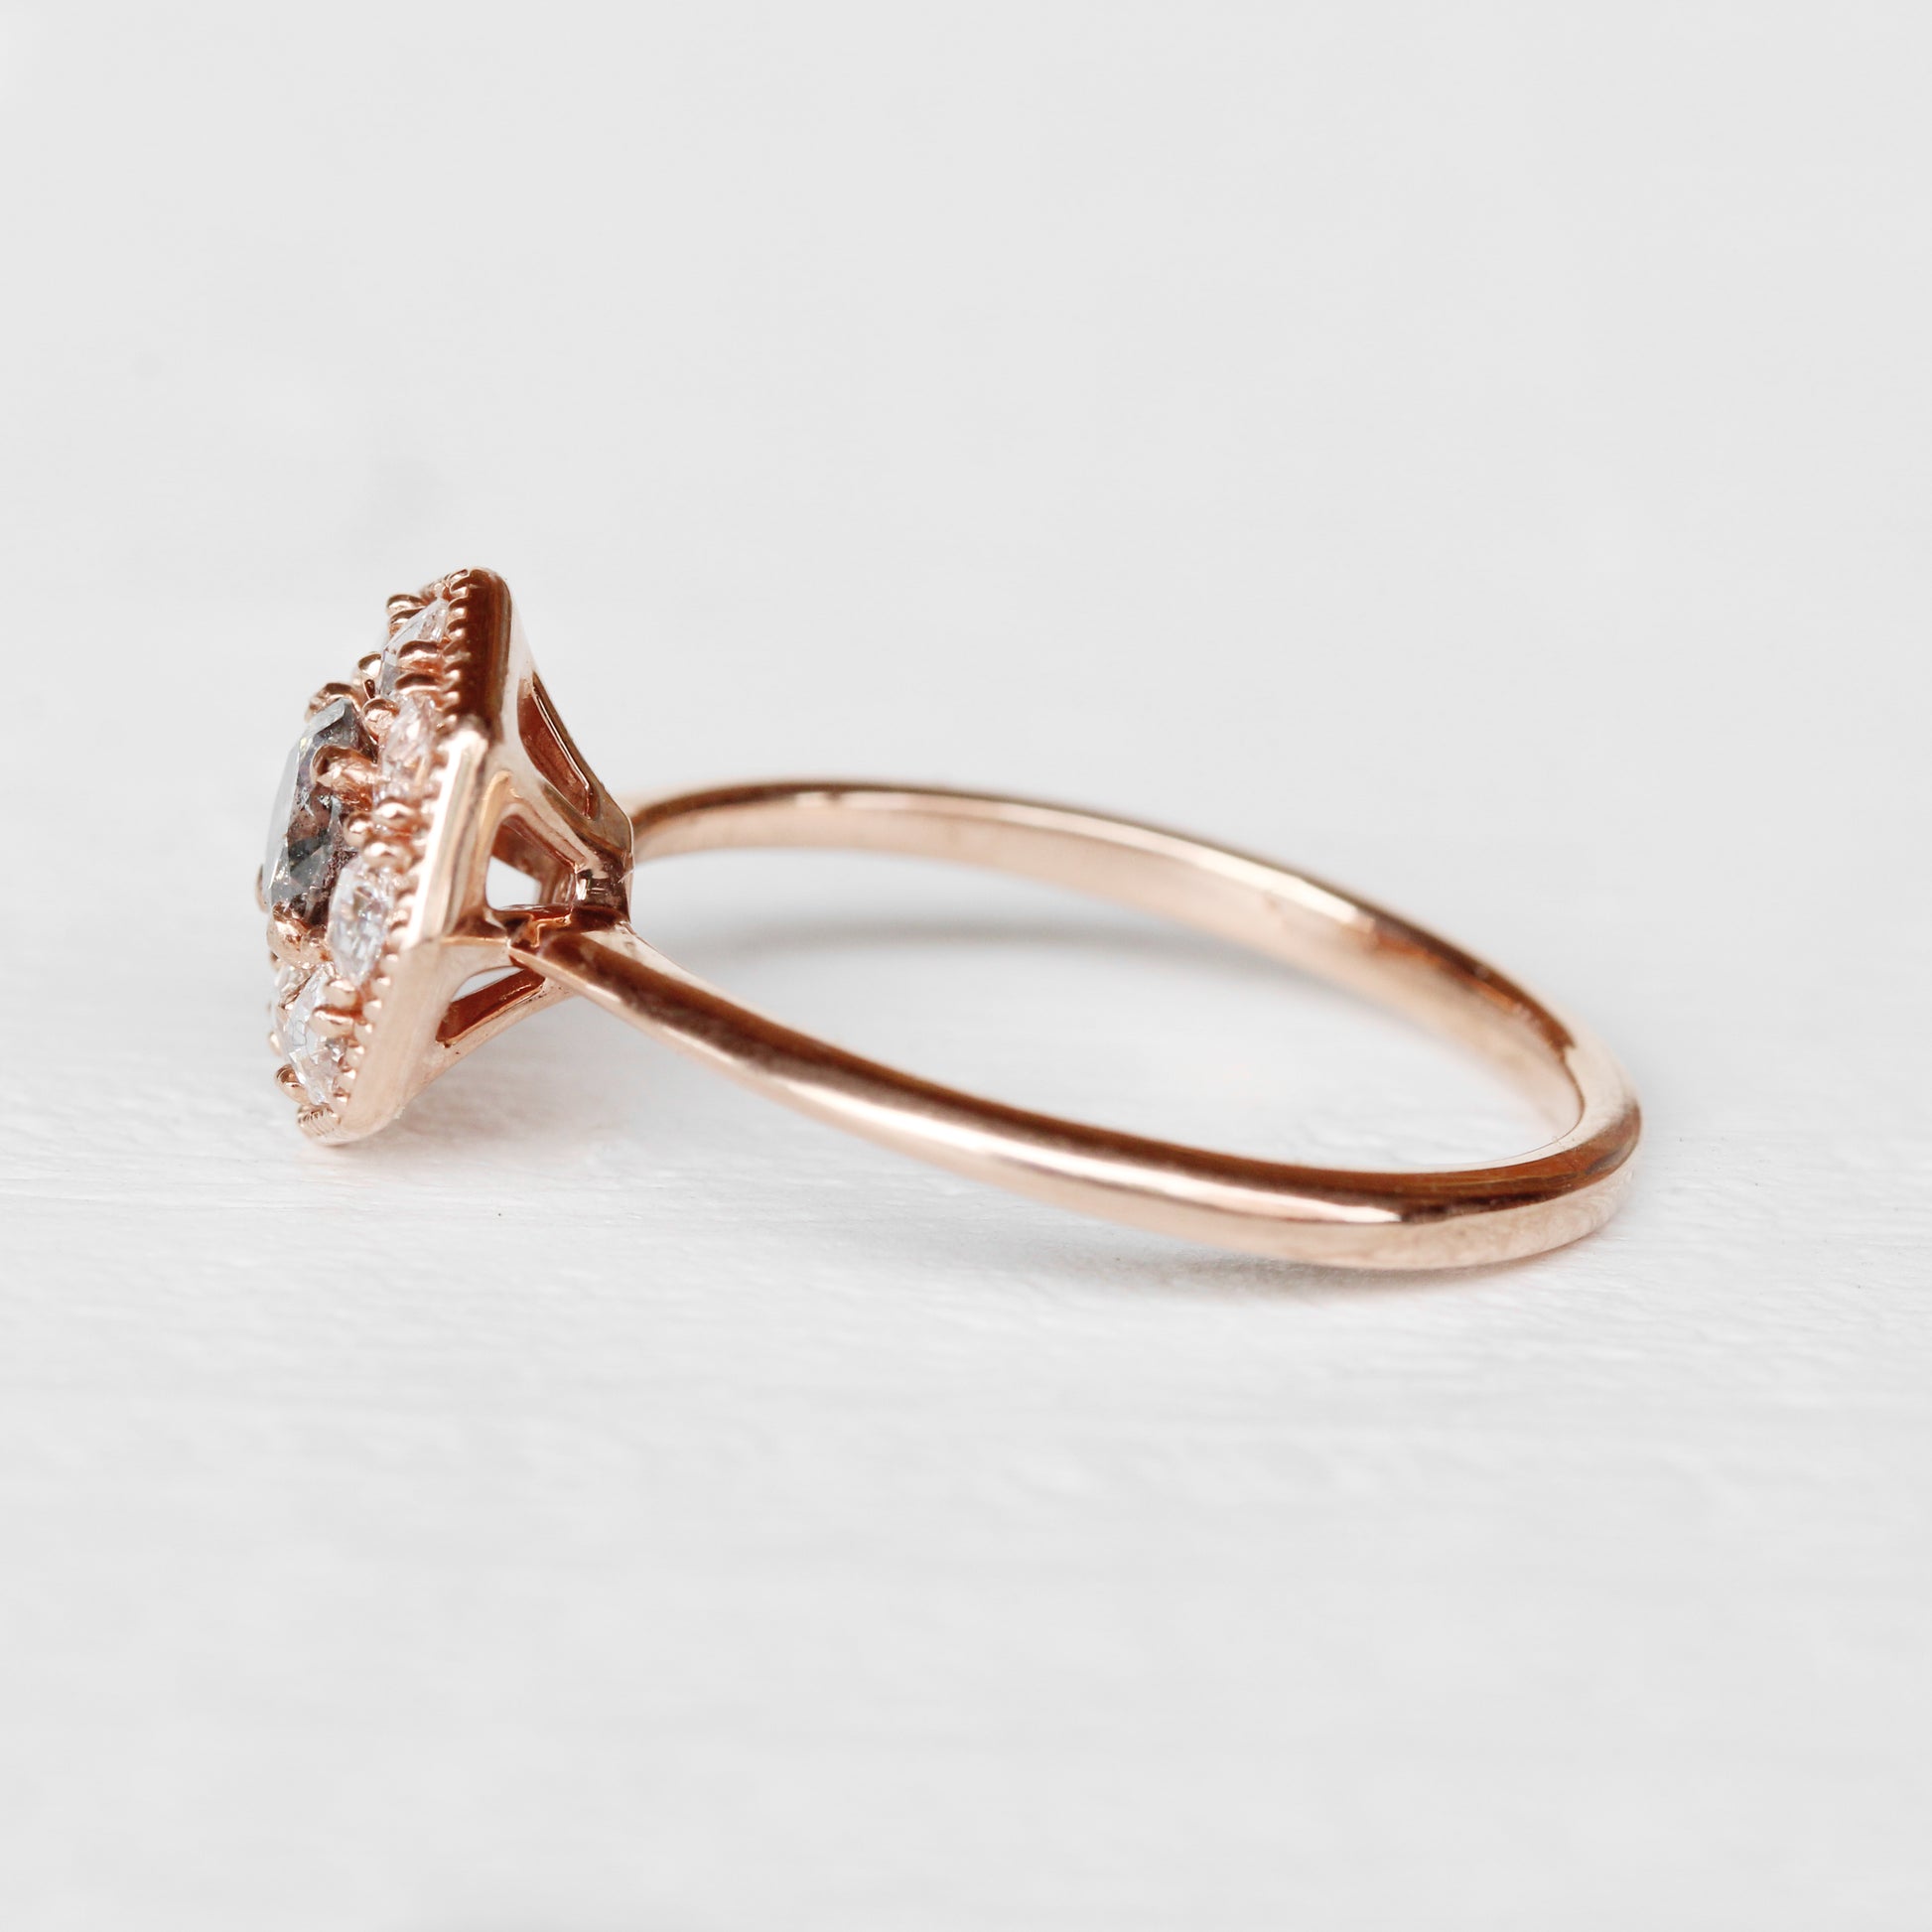 Ethel Ring with a Celestial Diamond in Your Choice of 14k Gold - Made to Order - Midwinter Co. Alternative Bridal Rings and Modern Fine Jewelry